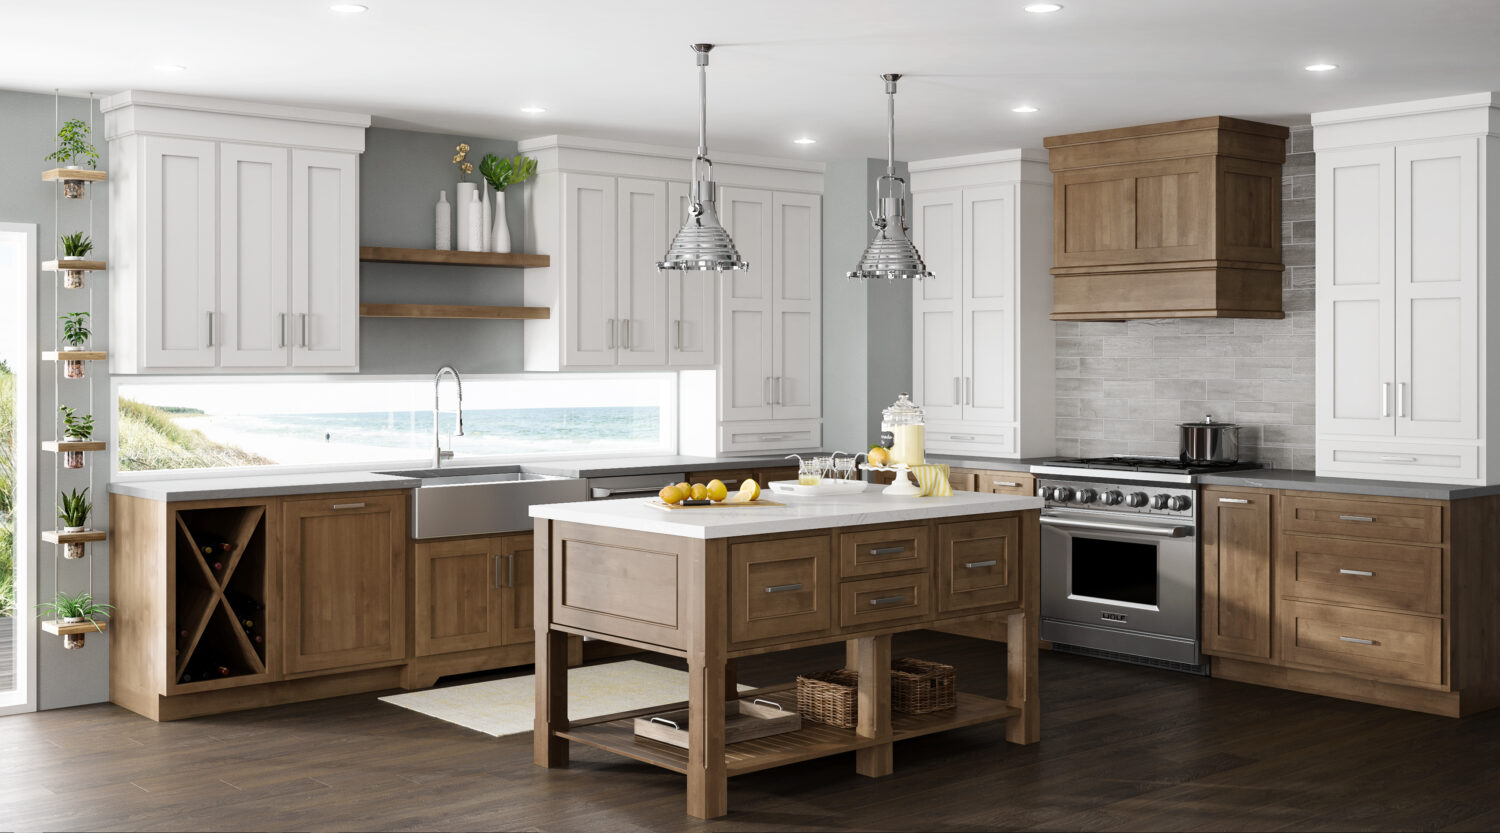 A kitchen layout idea in an L-Shaped kitchen design with a farm table style kitchen island. Standard overlay cabinet doors create add a splash of traditional style in this modern beach home.